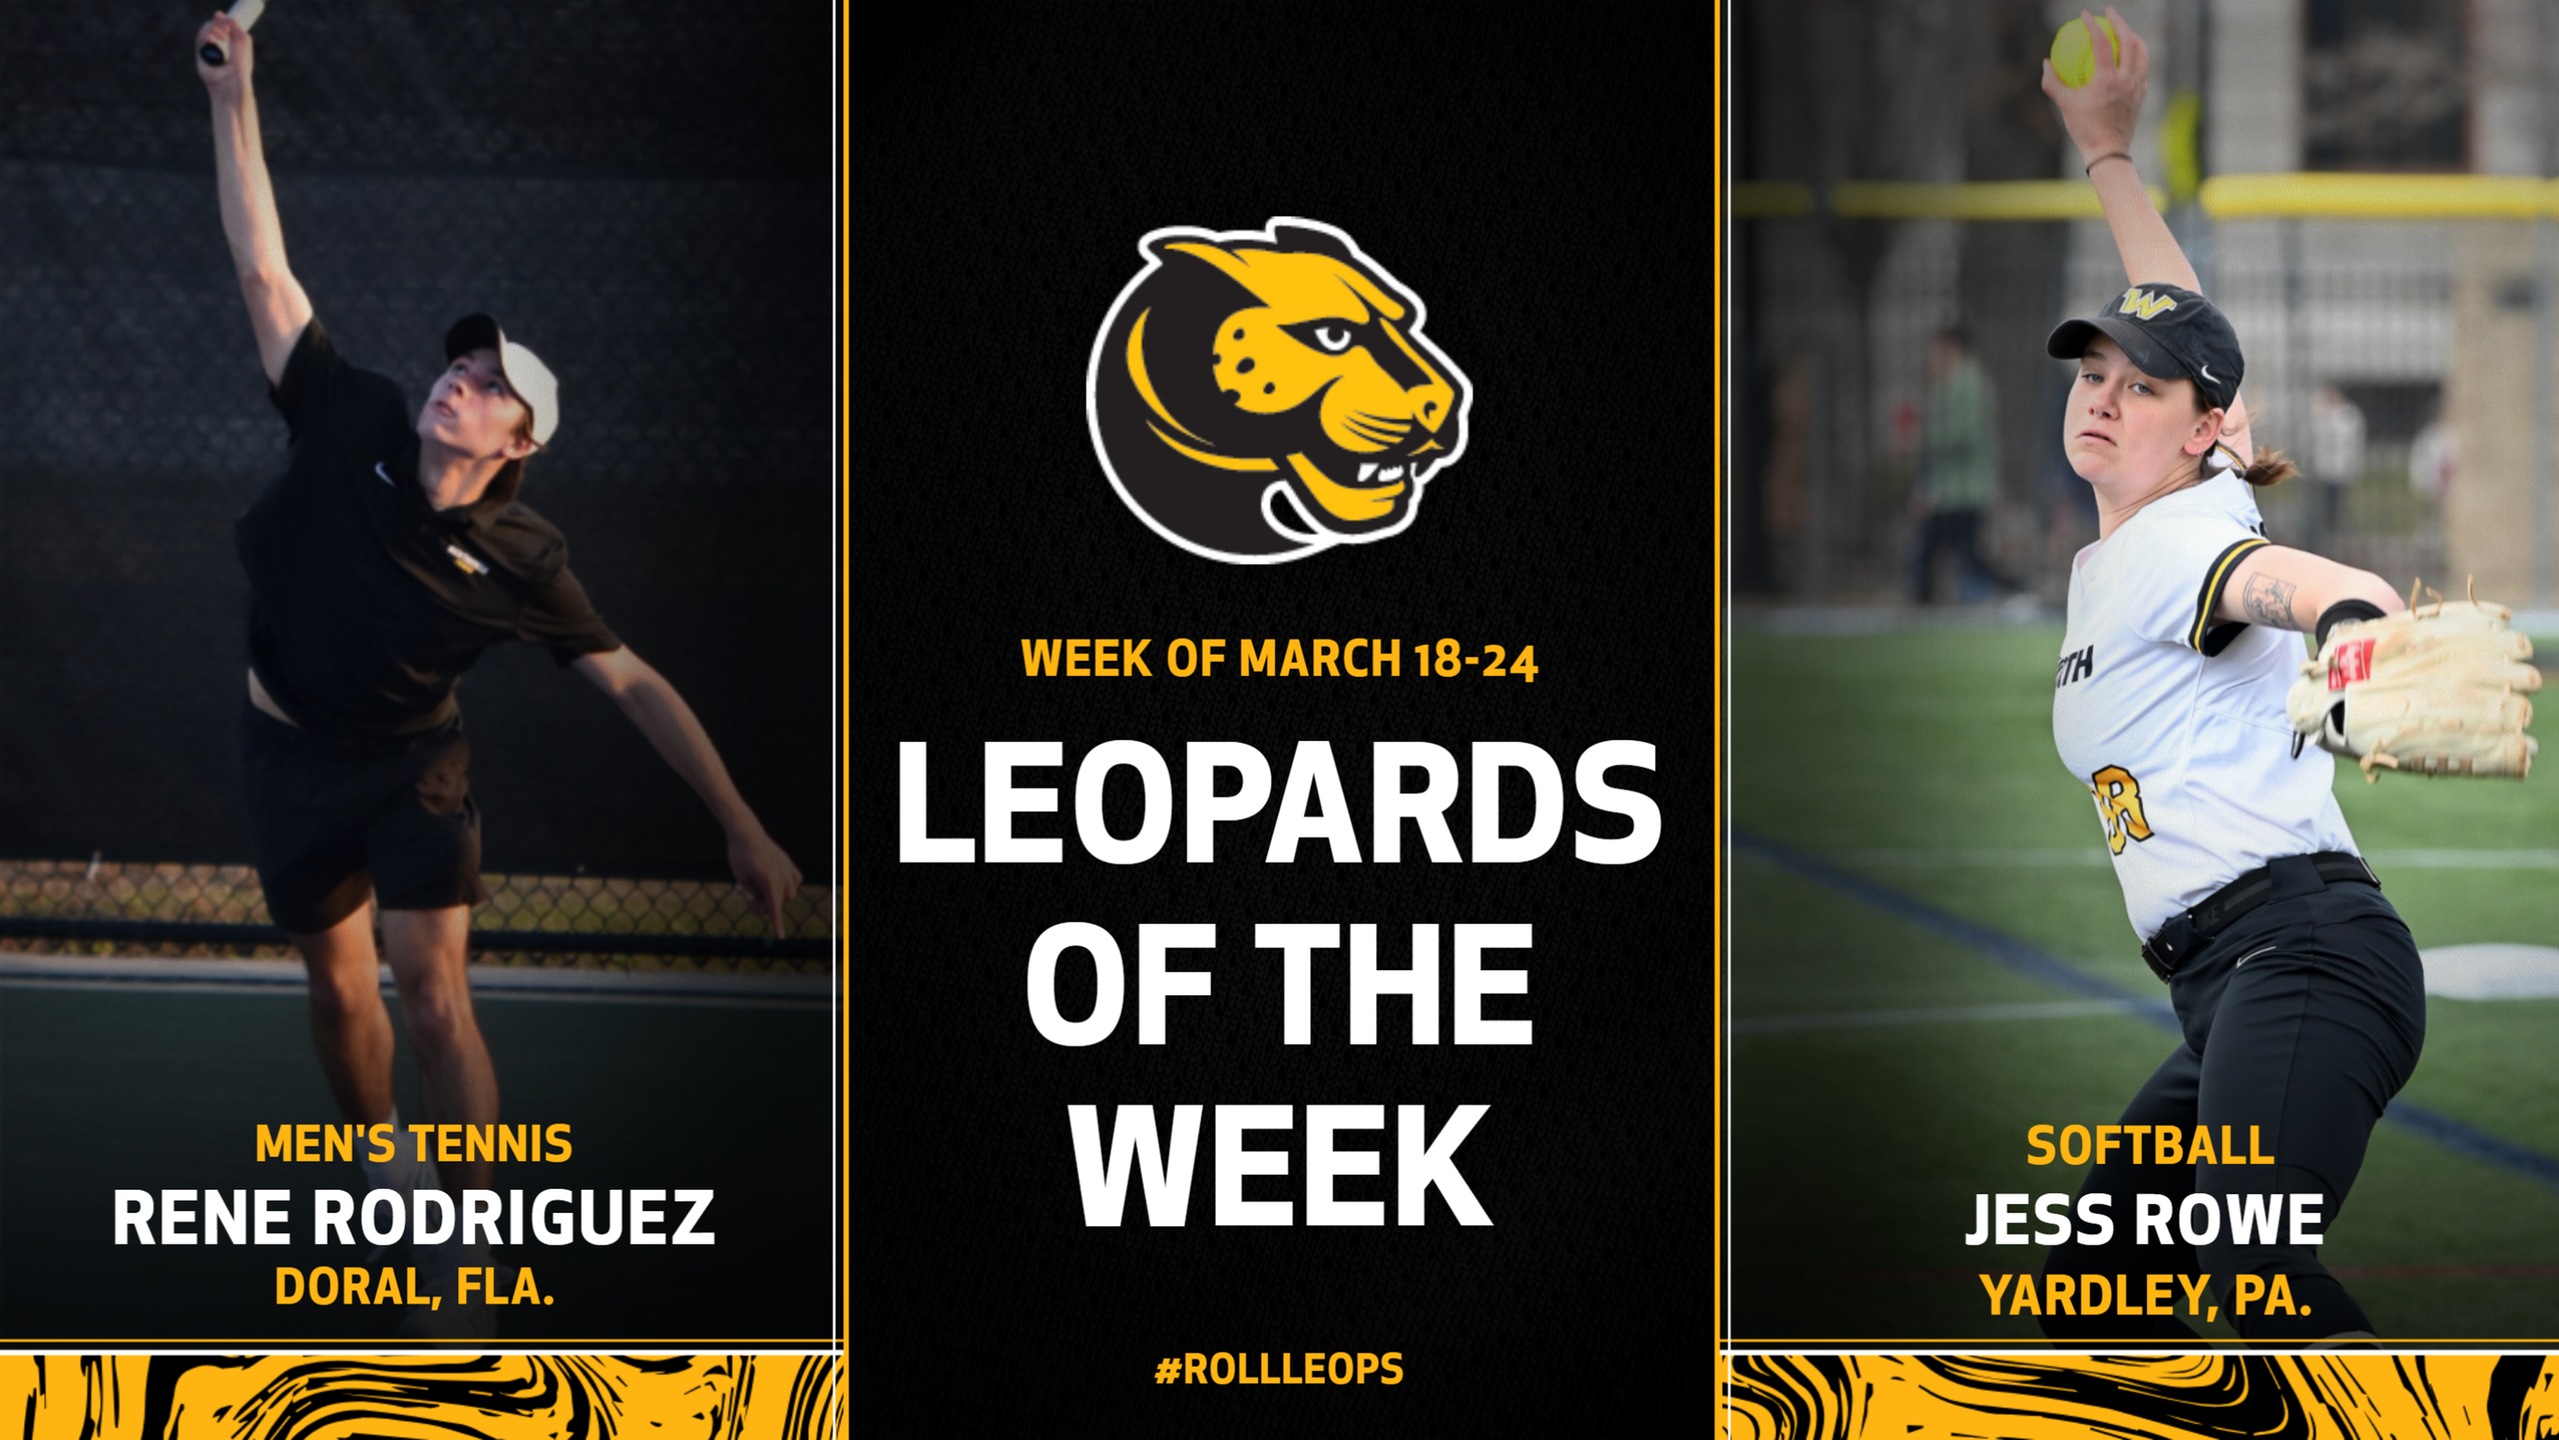 Rodriguez, Rowe Named Leopards of the Week